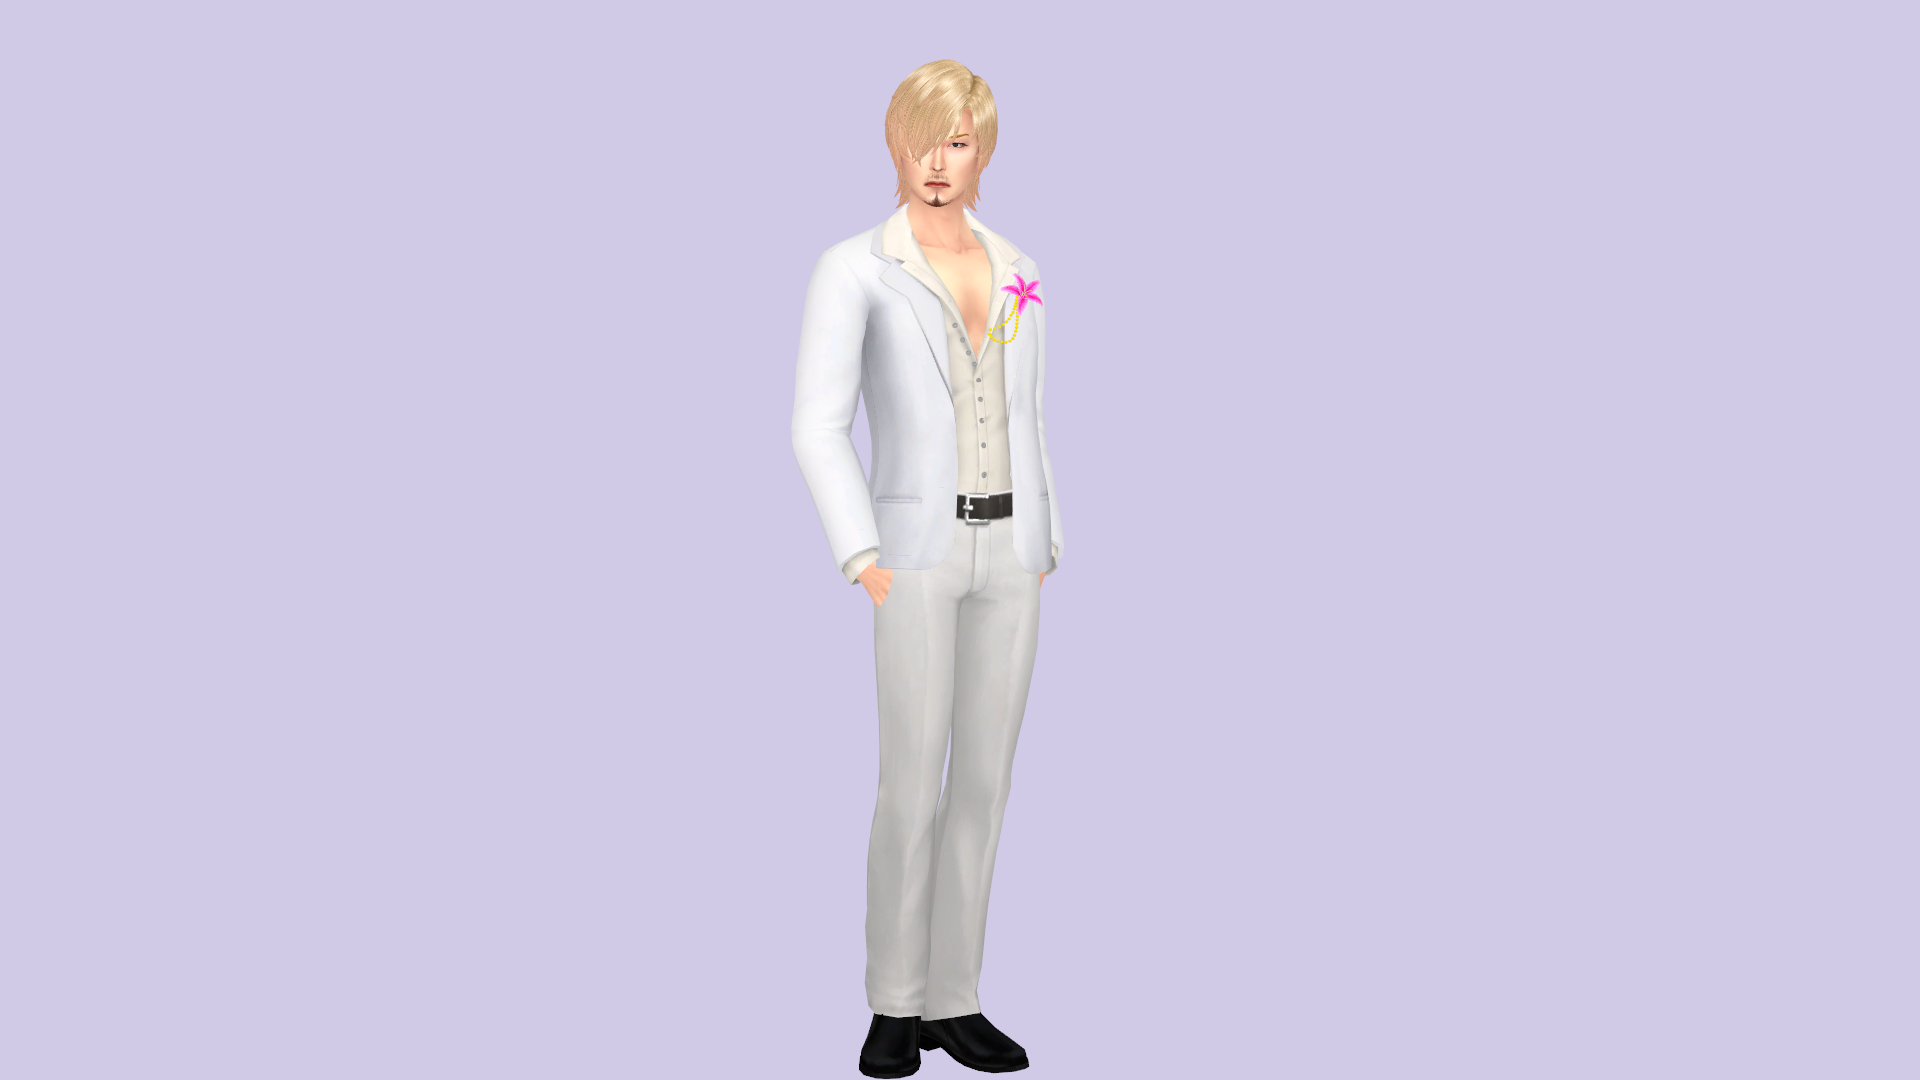 HALLOWEEN COLLECTION: SANJI OUTFIT - The Sims 4 Create a Sim - CurseForge